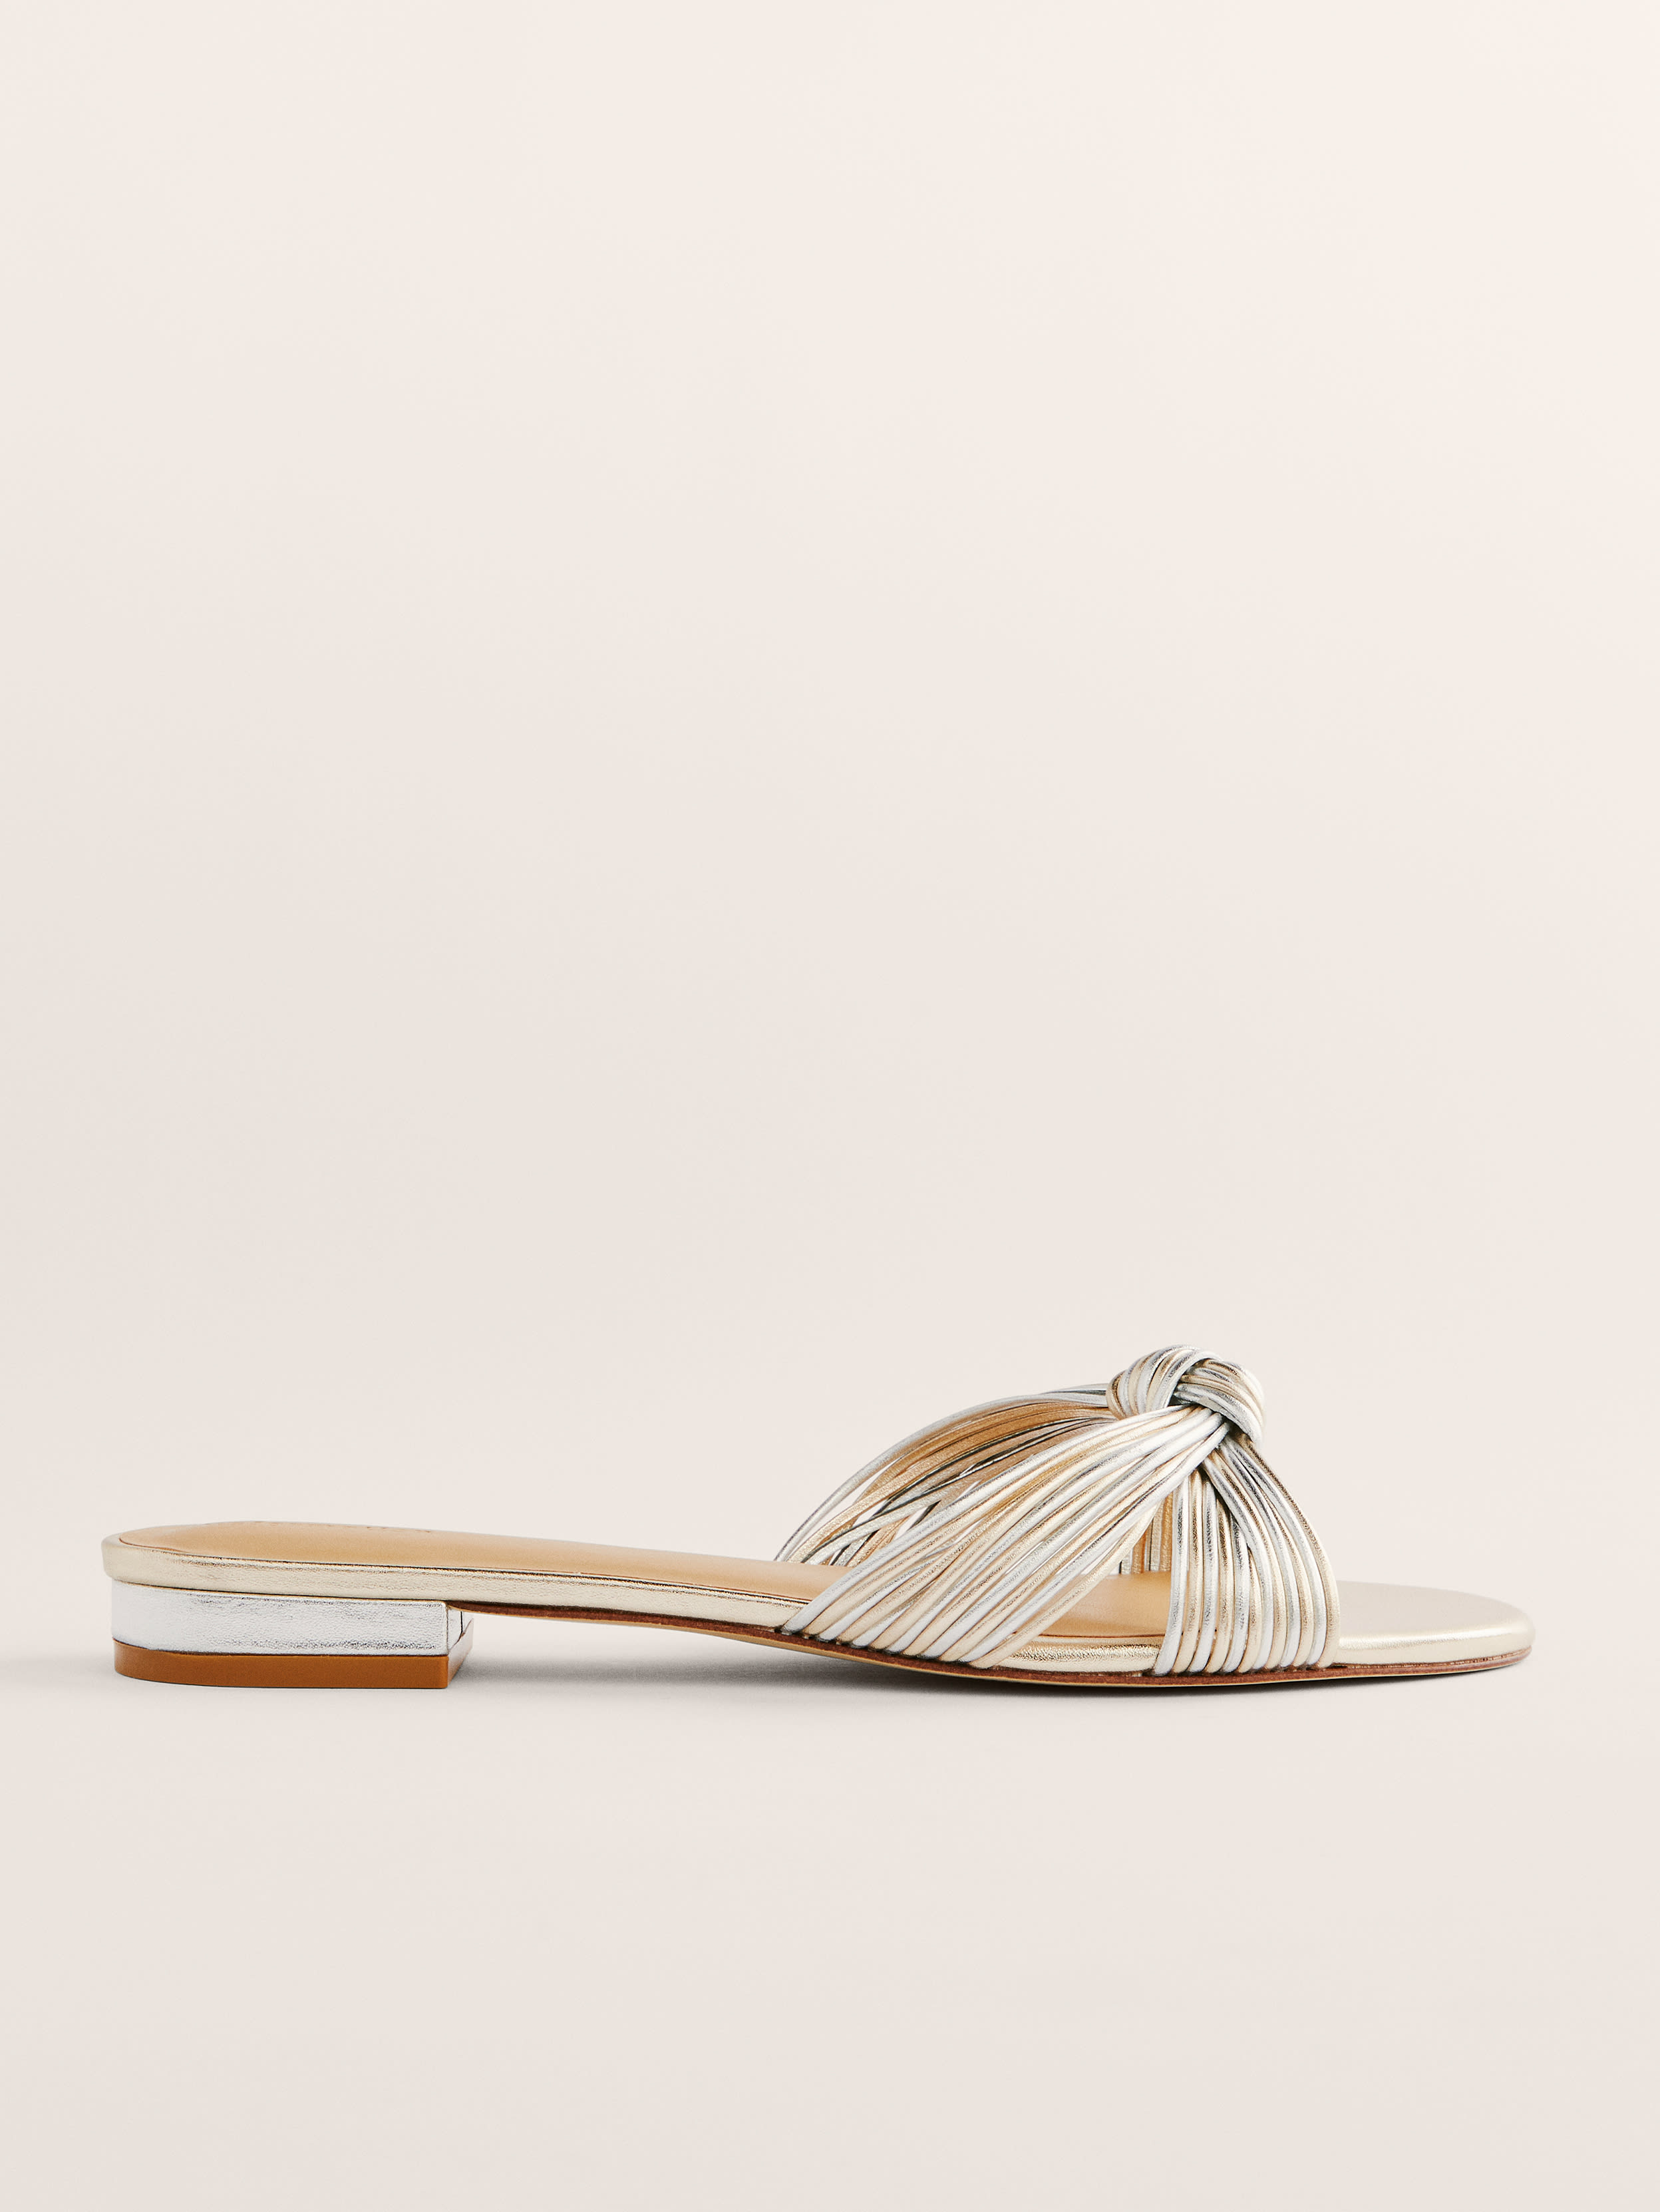 Reformation Peridot Mignon Knot Flat Sandal In Gold / Silver